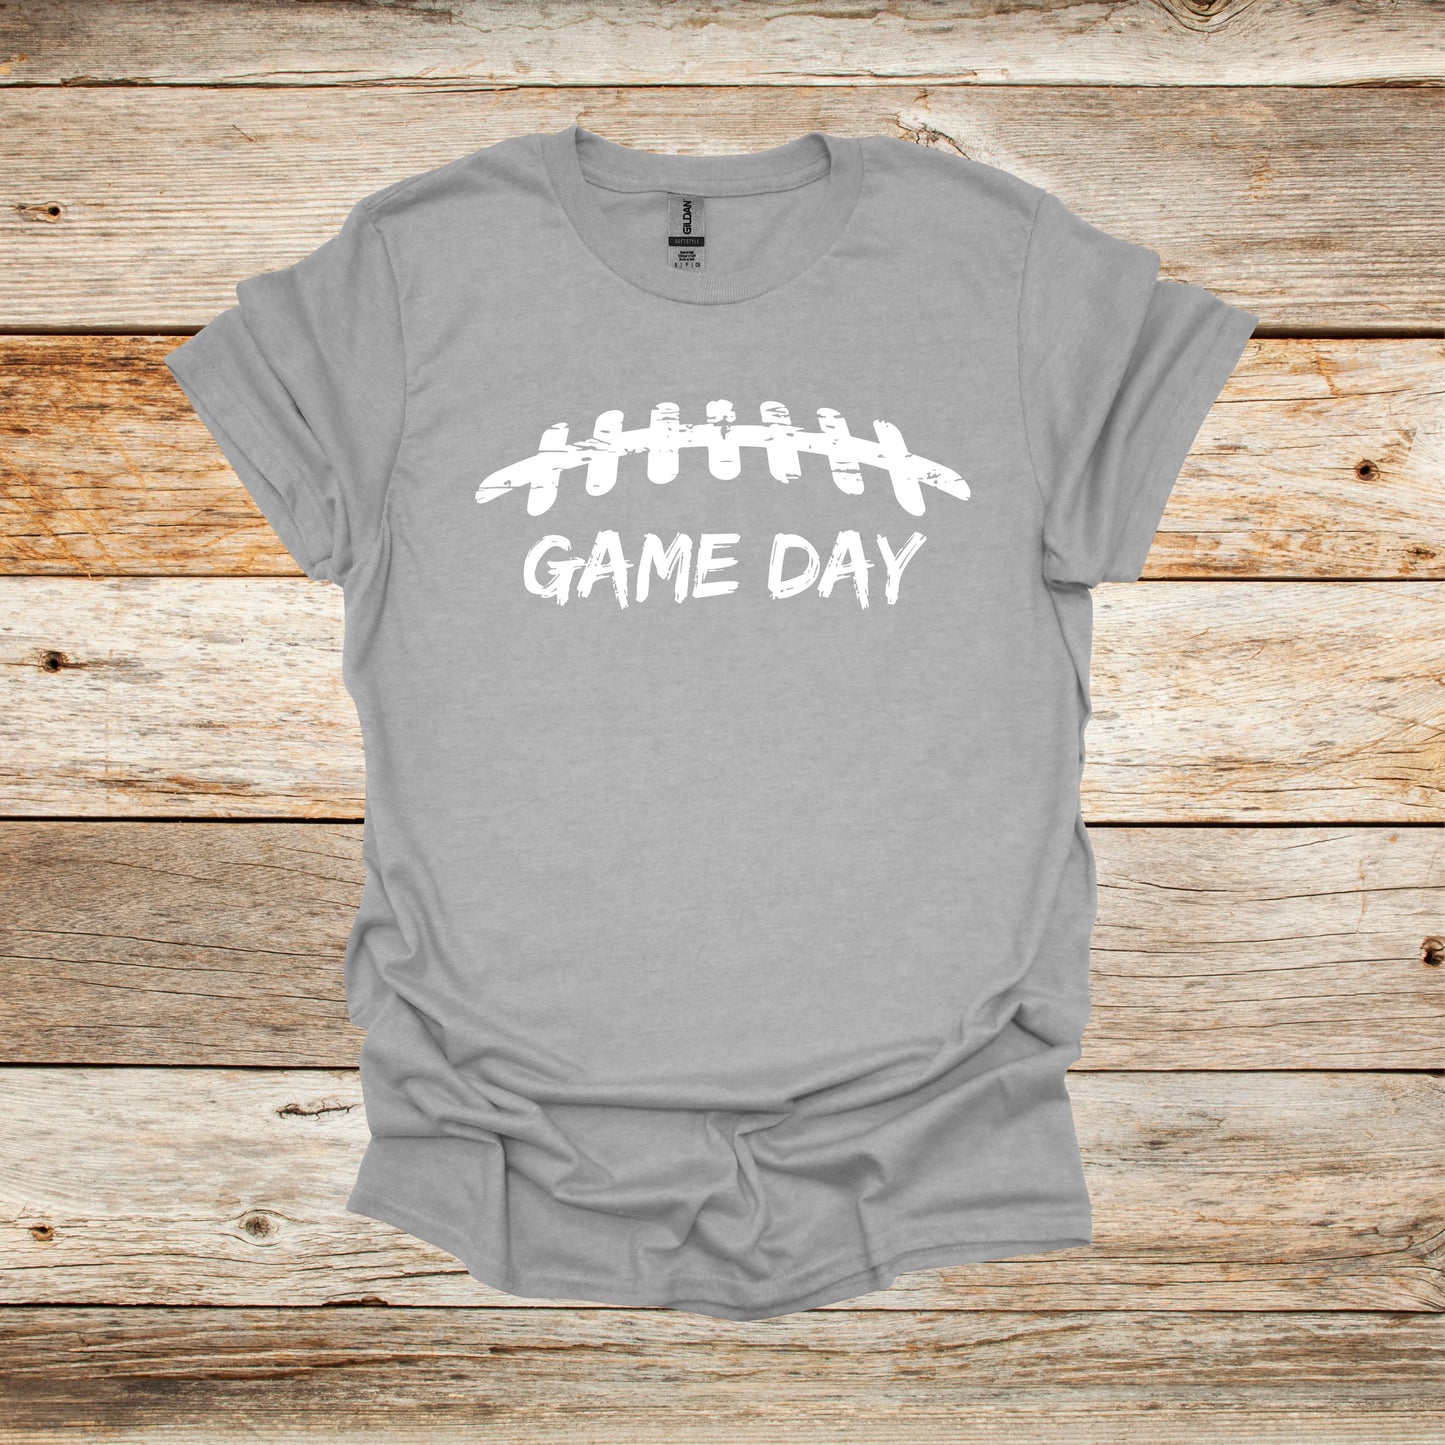 Football T-Shirt - Game Day Laces - Adult and Children's Tee Shirts - Game Day - Sports T-Shirts Graphic Avenue Sport Grey Adult Small 